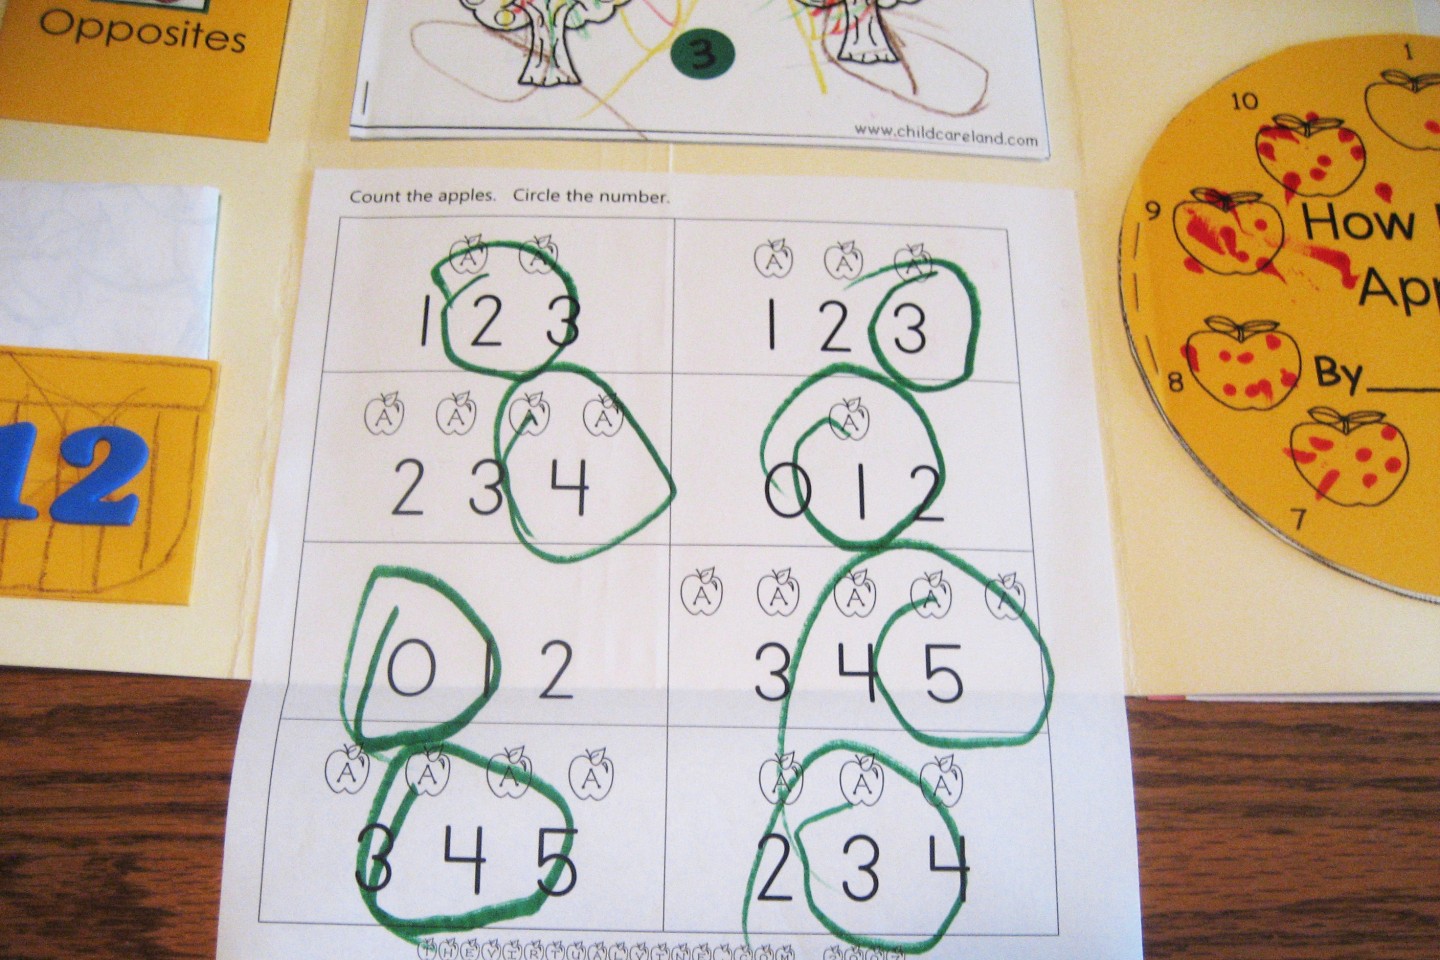 There's a real lack of math learning in pre-K. In one study, in fact, just 58 seconds out of a full preschool day was spent on math activities. (Kaylhew/Flikr Creative Commons)